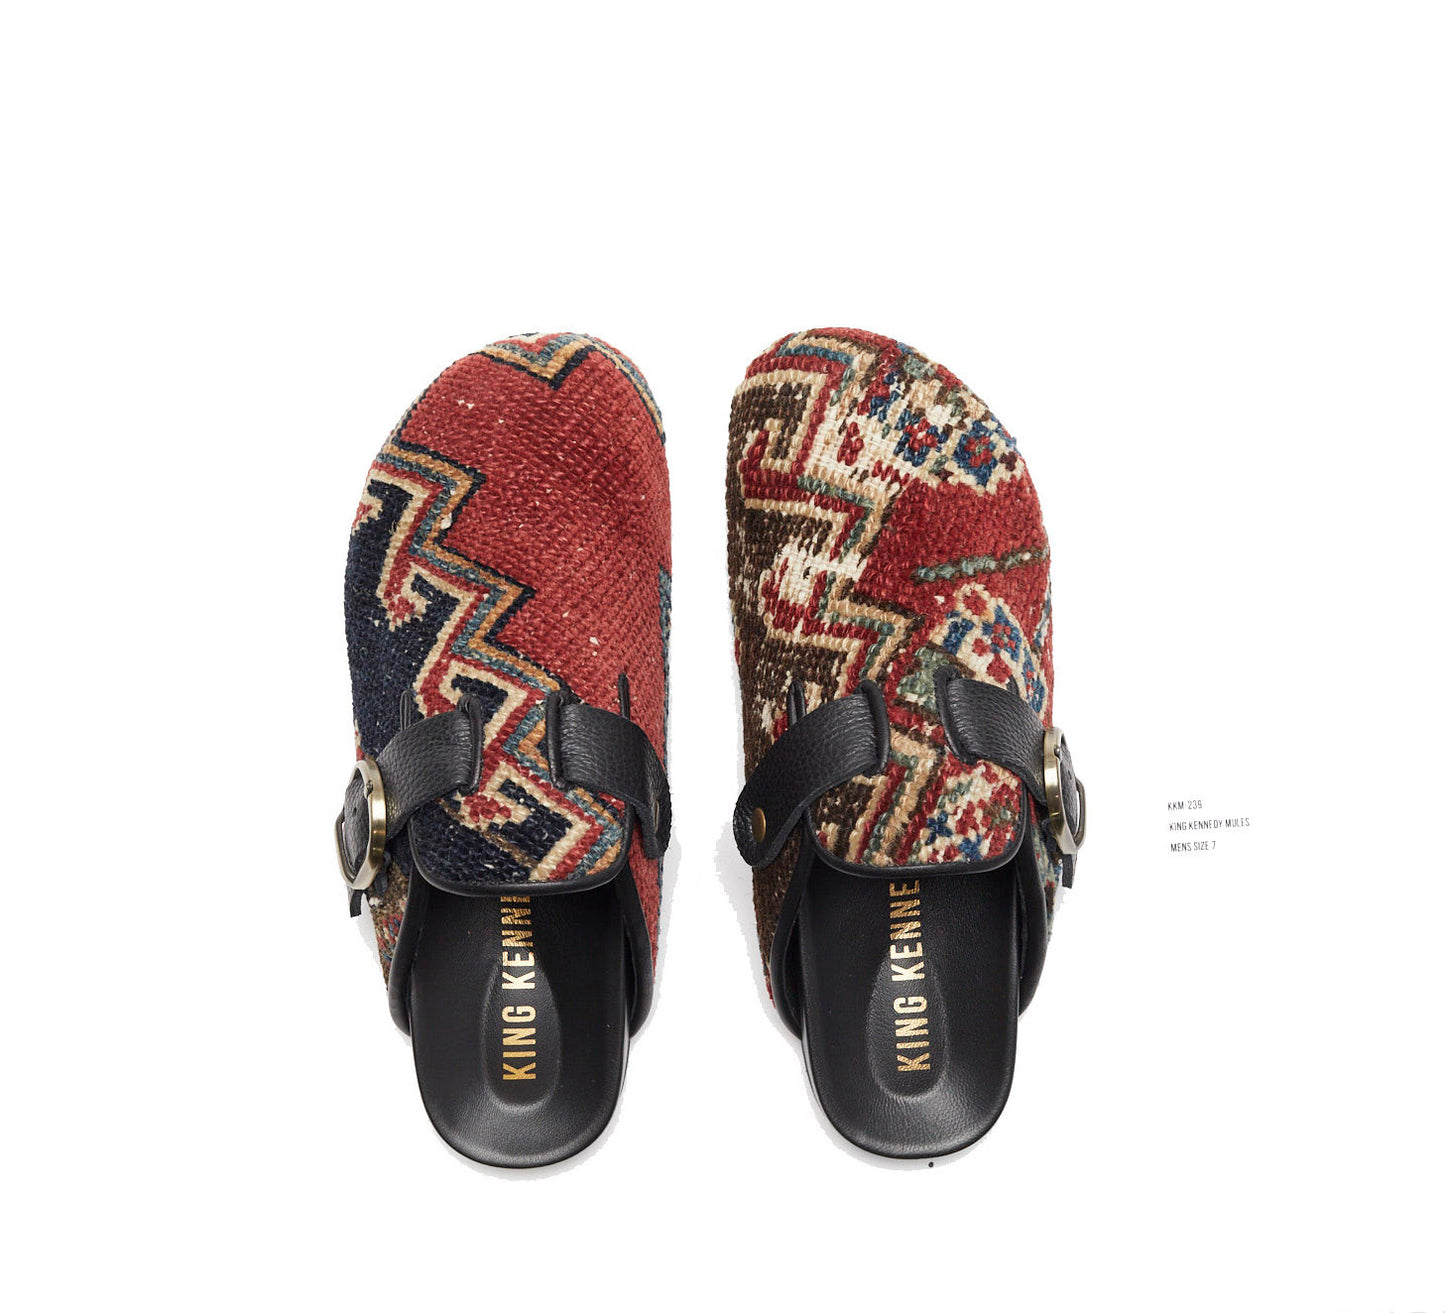 one-of-a-kind mule made of 100 year old antique Persian rug fragments with soft lambskin footbed and rubber sole. Similar in shape to the Birkenstock Boston clog. These men's size 7 are made of an antique red, blue and white rug with zig zag patterns.